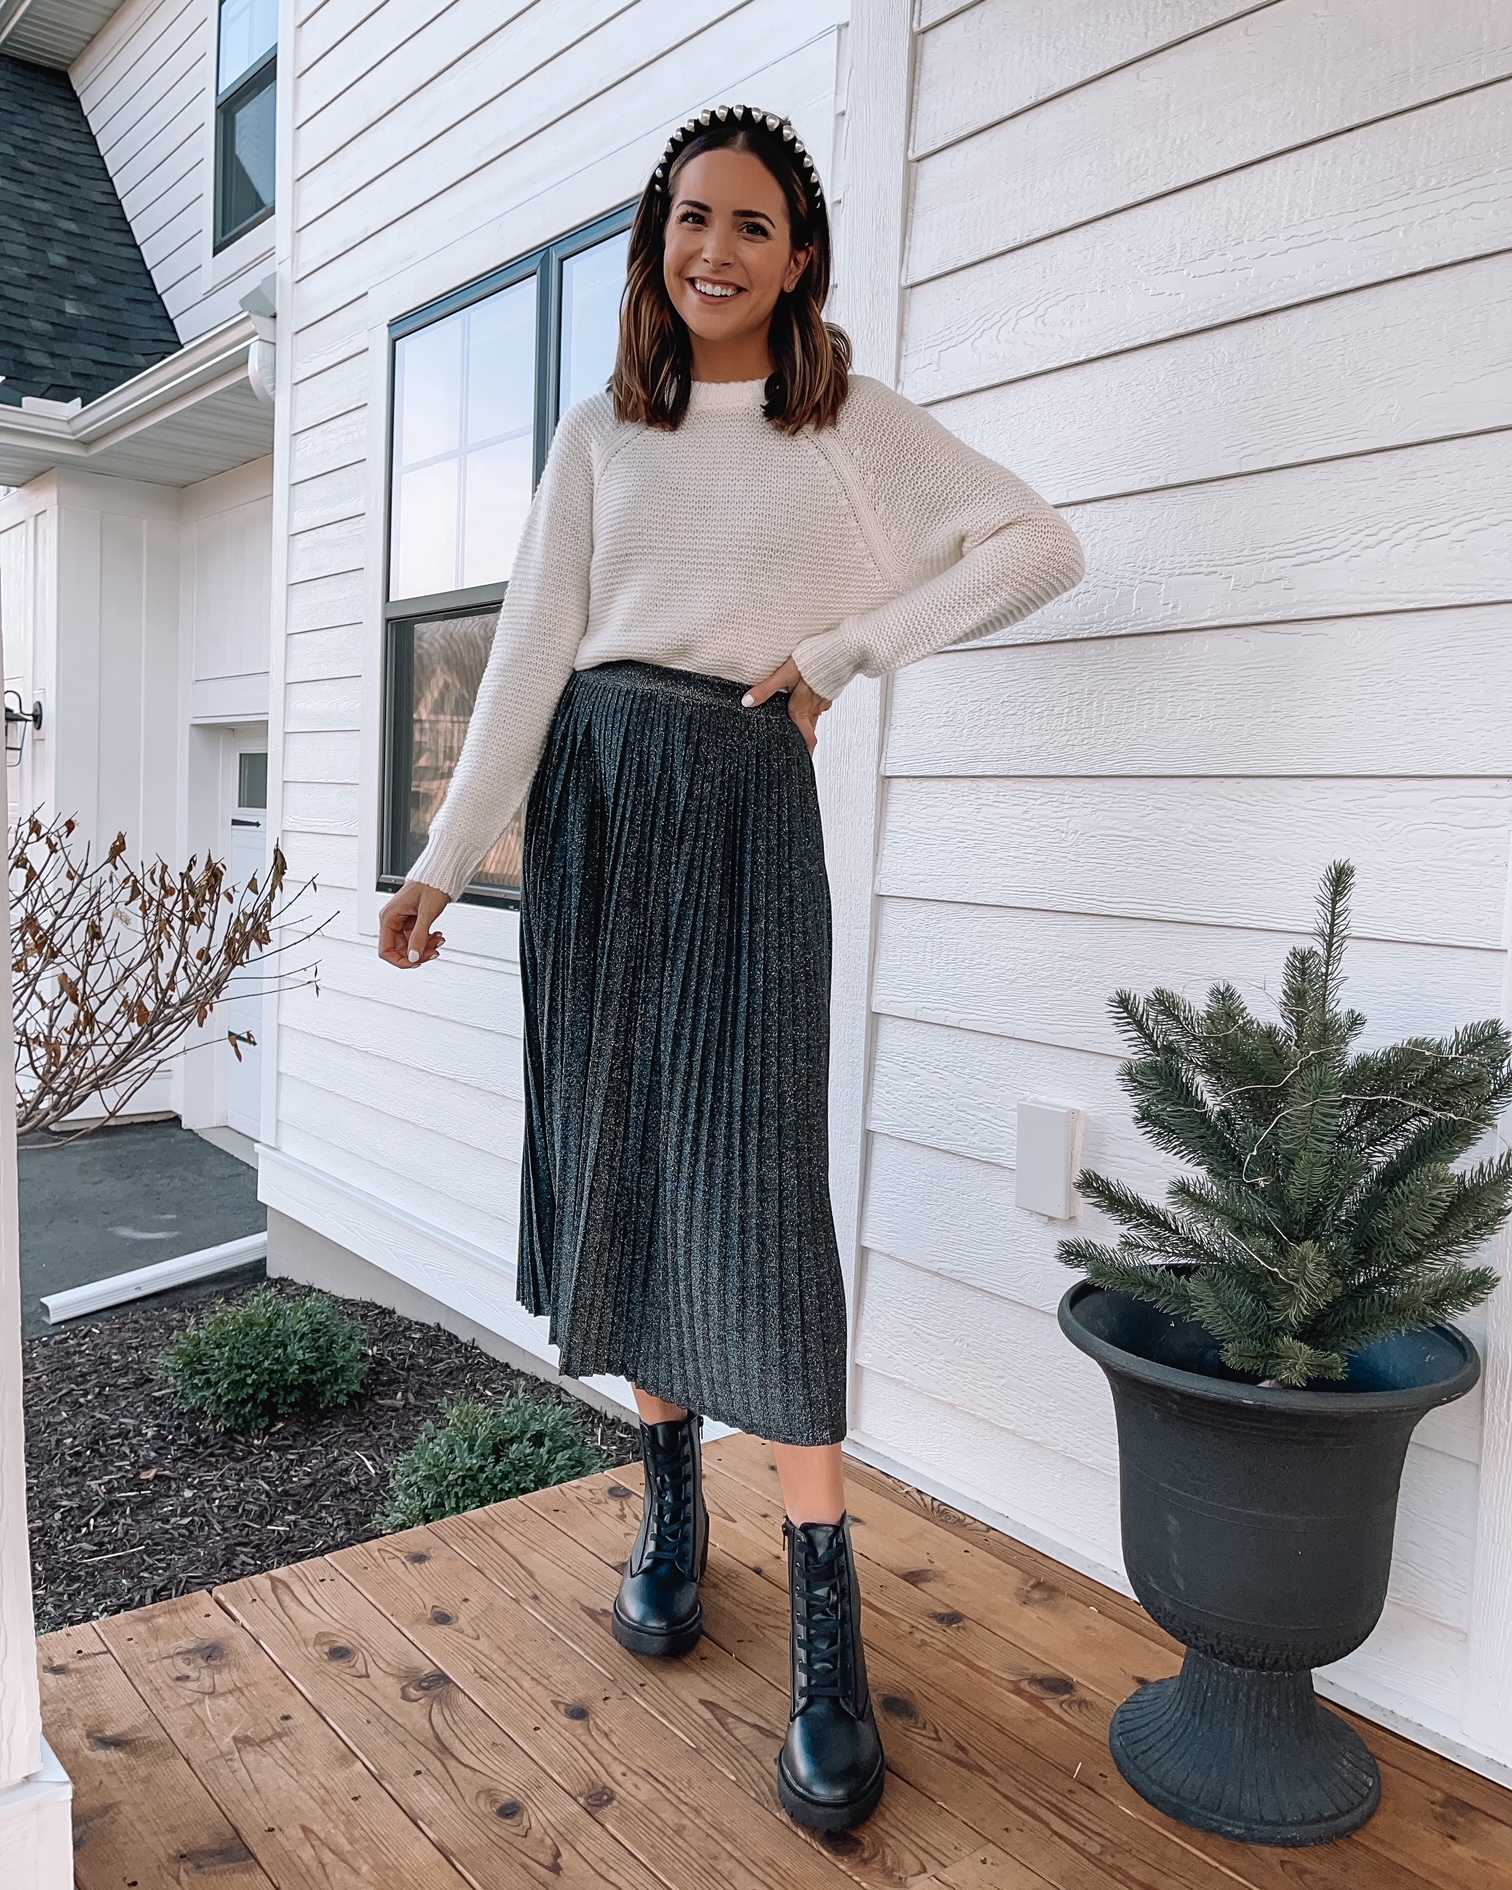 target winter fashion, affordable holiday looks, #targetstyle